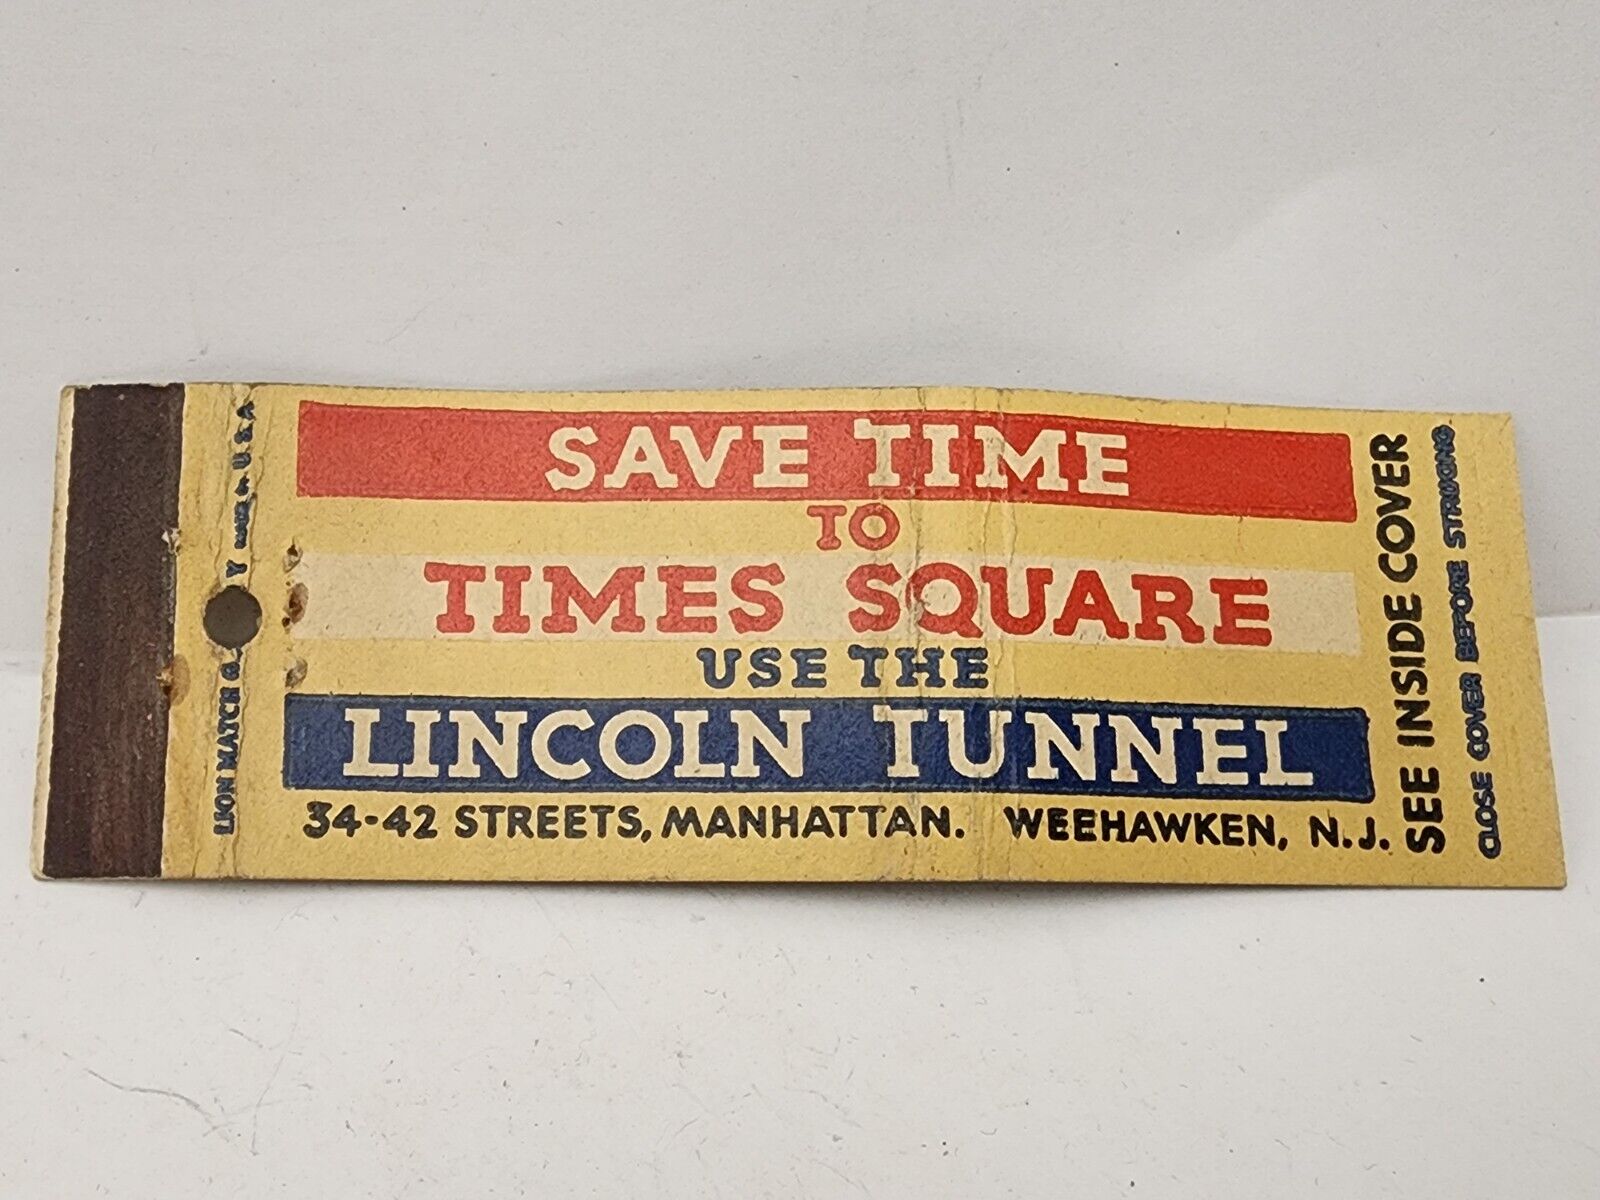 Vintage Matchbook Cover - Save Time to TIME SQUARE Lincoln Tunnel Manhattan NY